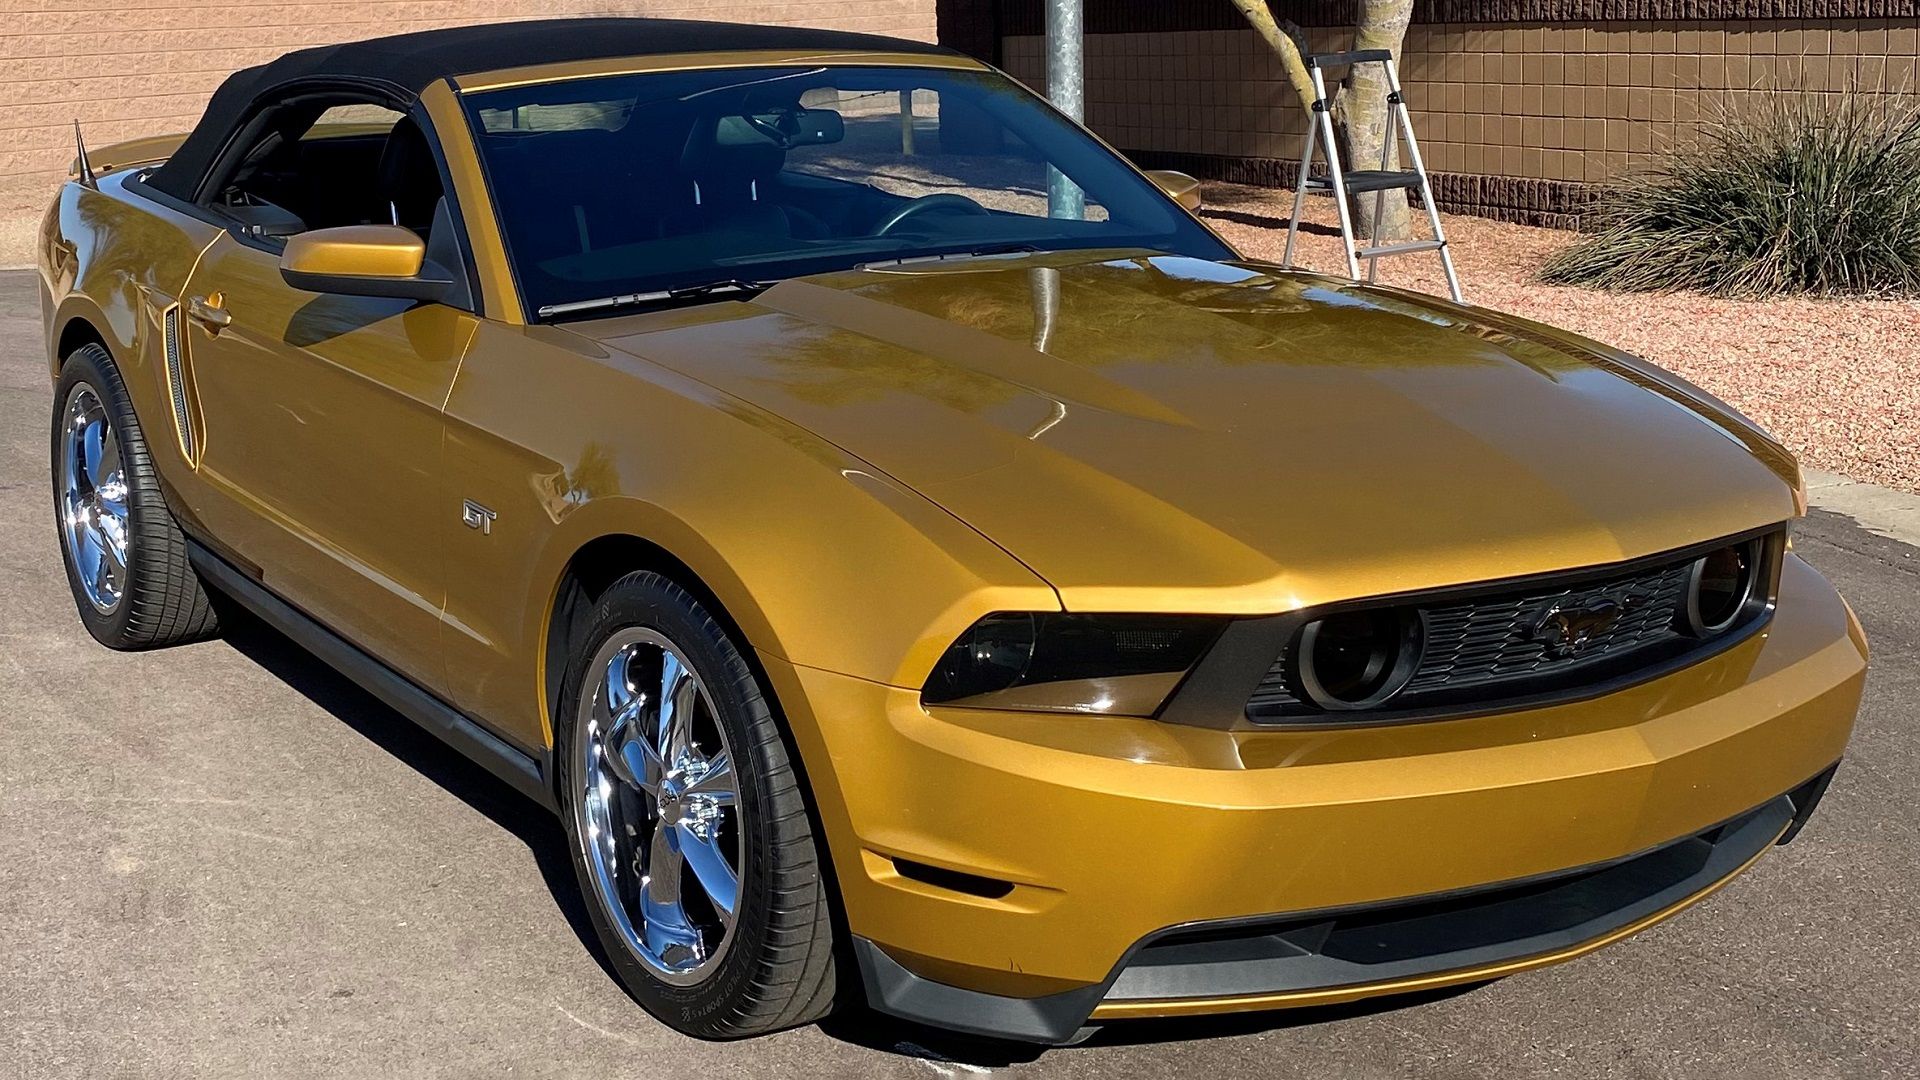 A parked 2010 Ford Mustang GT Premium Convertible